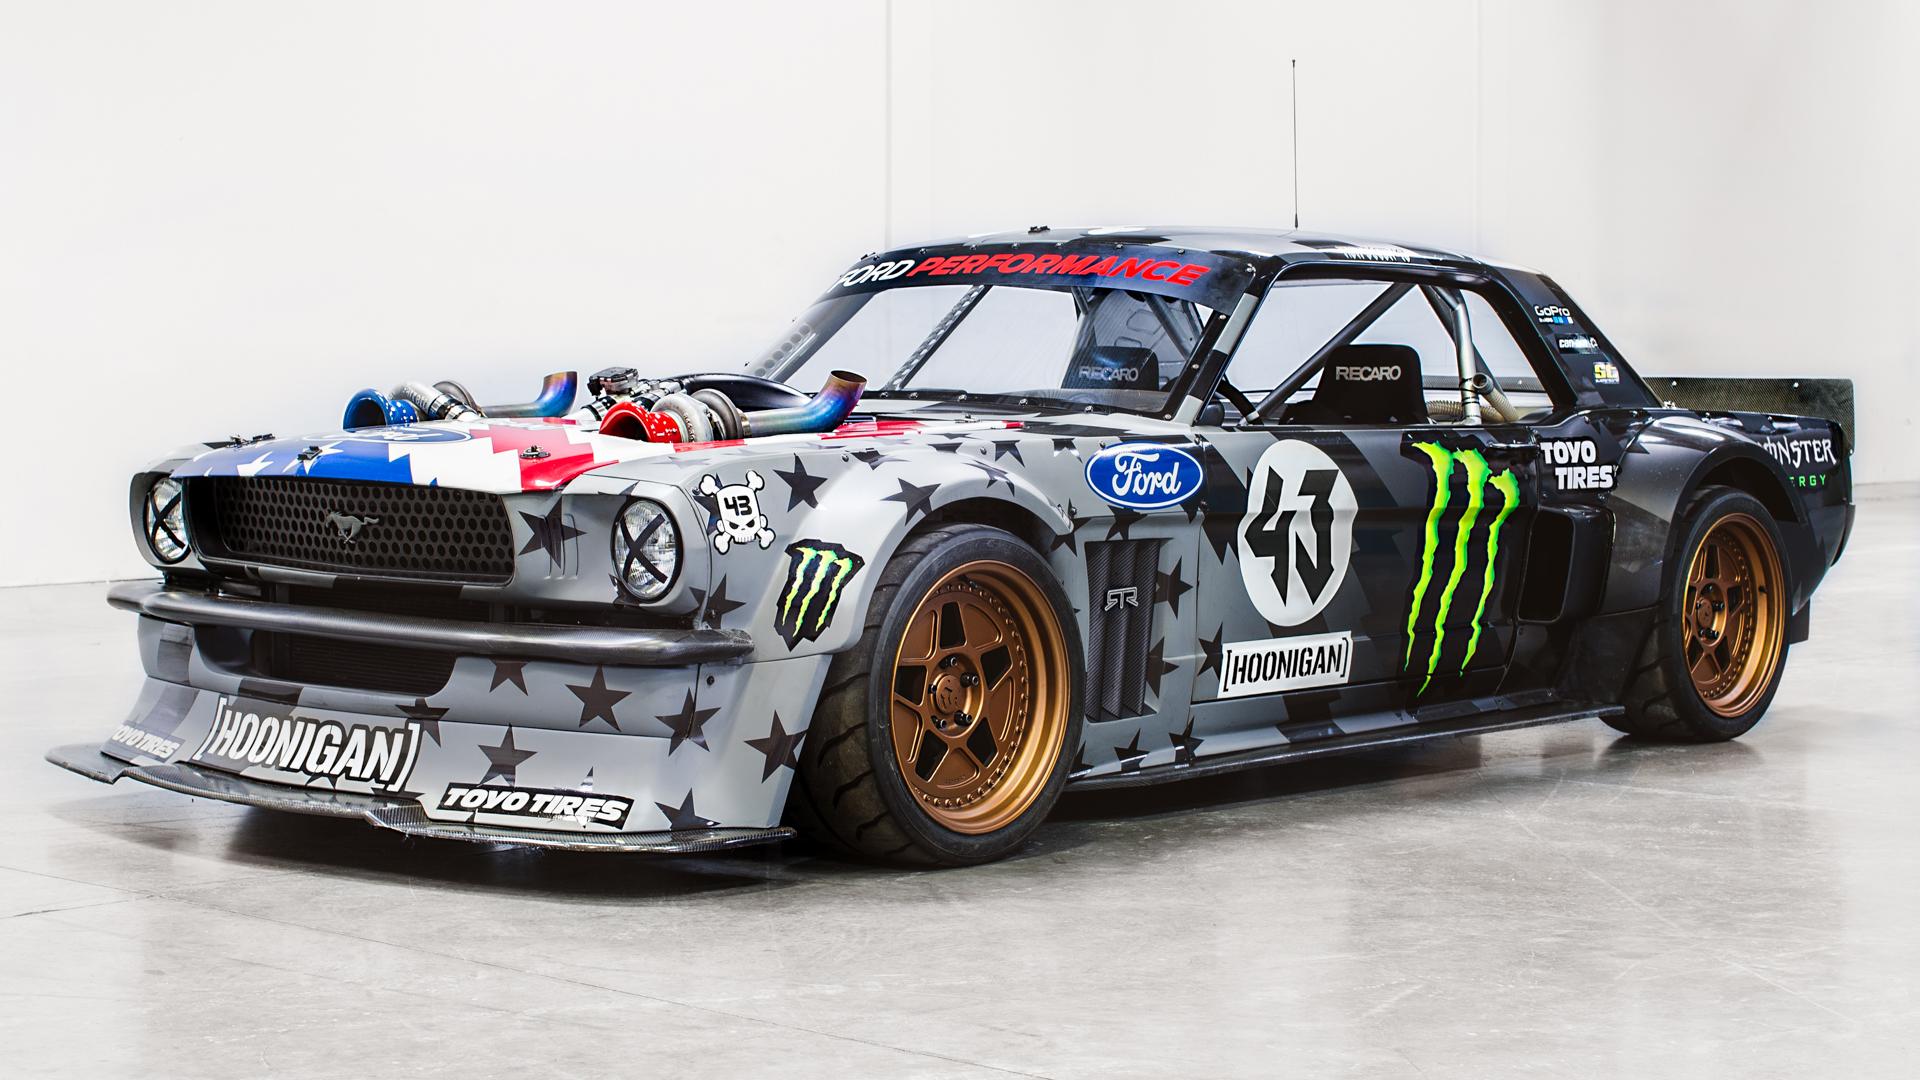 Wallpaper : 1920x1280 px, drift, Ford, hoonicorn, hot, monster, Mustang,  race, racing, rod, rods, RTR 1920x1280 - CoolWallpapers - 1730735 - HD  Wallpapers - WallHere